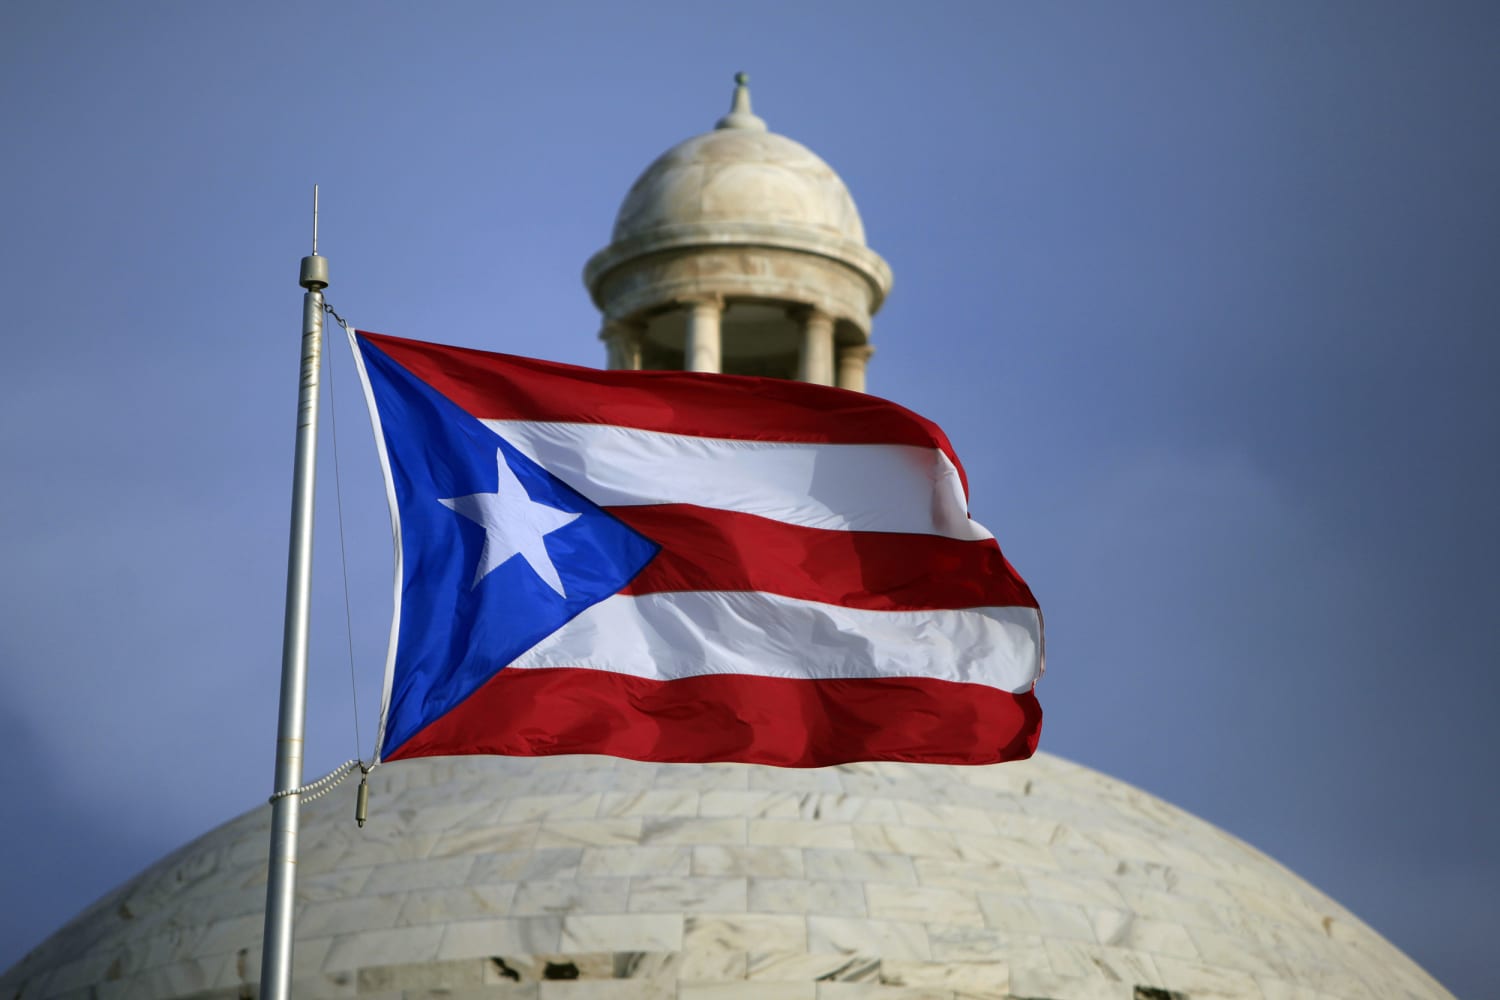 Puerto Rico formally exits bankruptcy following largest public debt restructuring